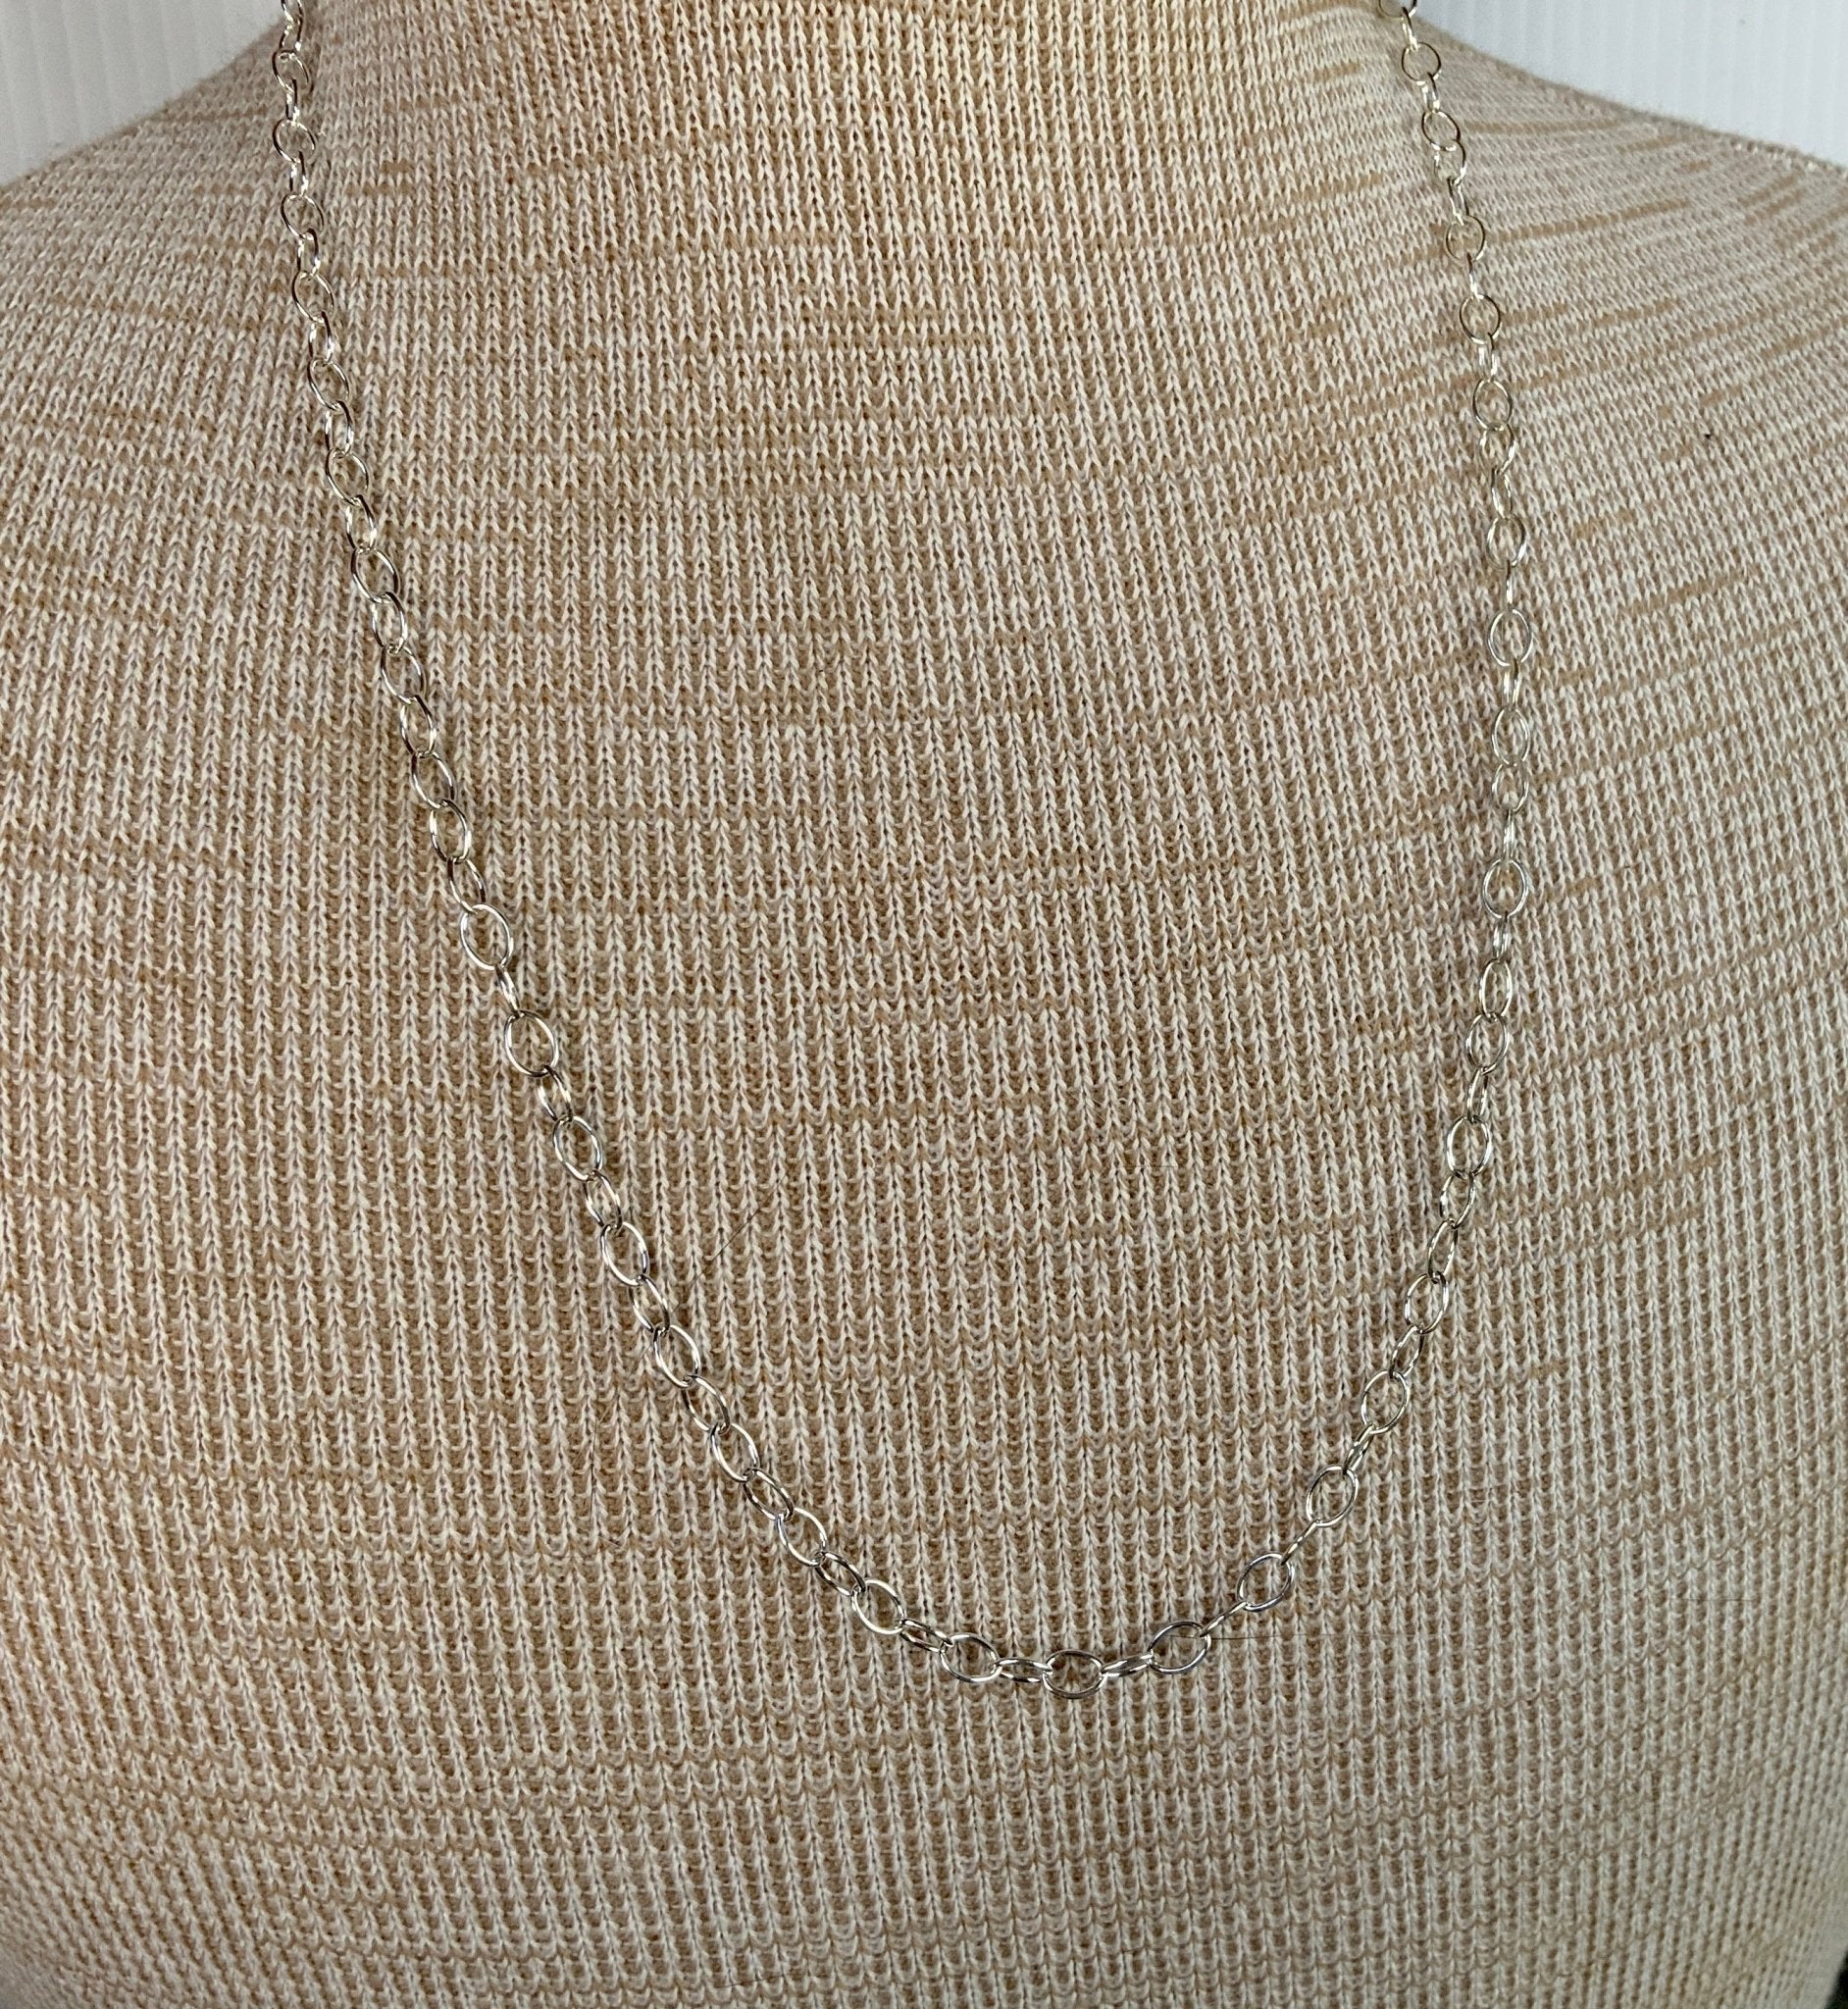 Sterling Silver Finished Chain - Evitts Creek Arts